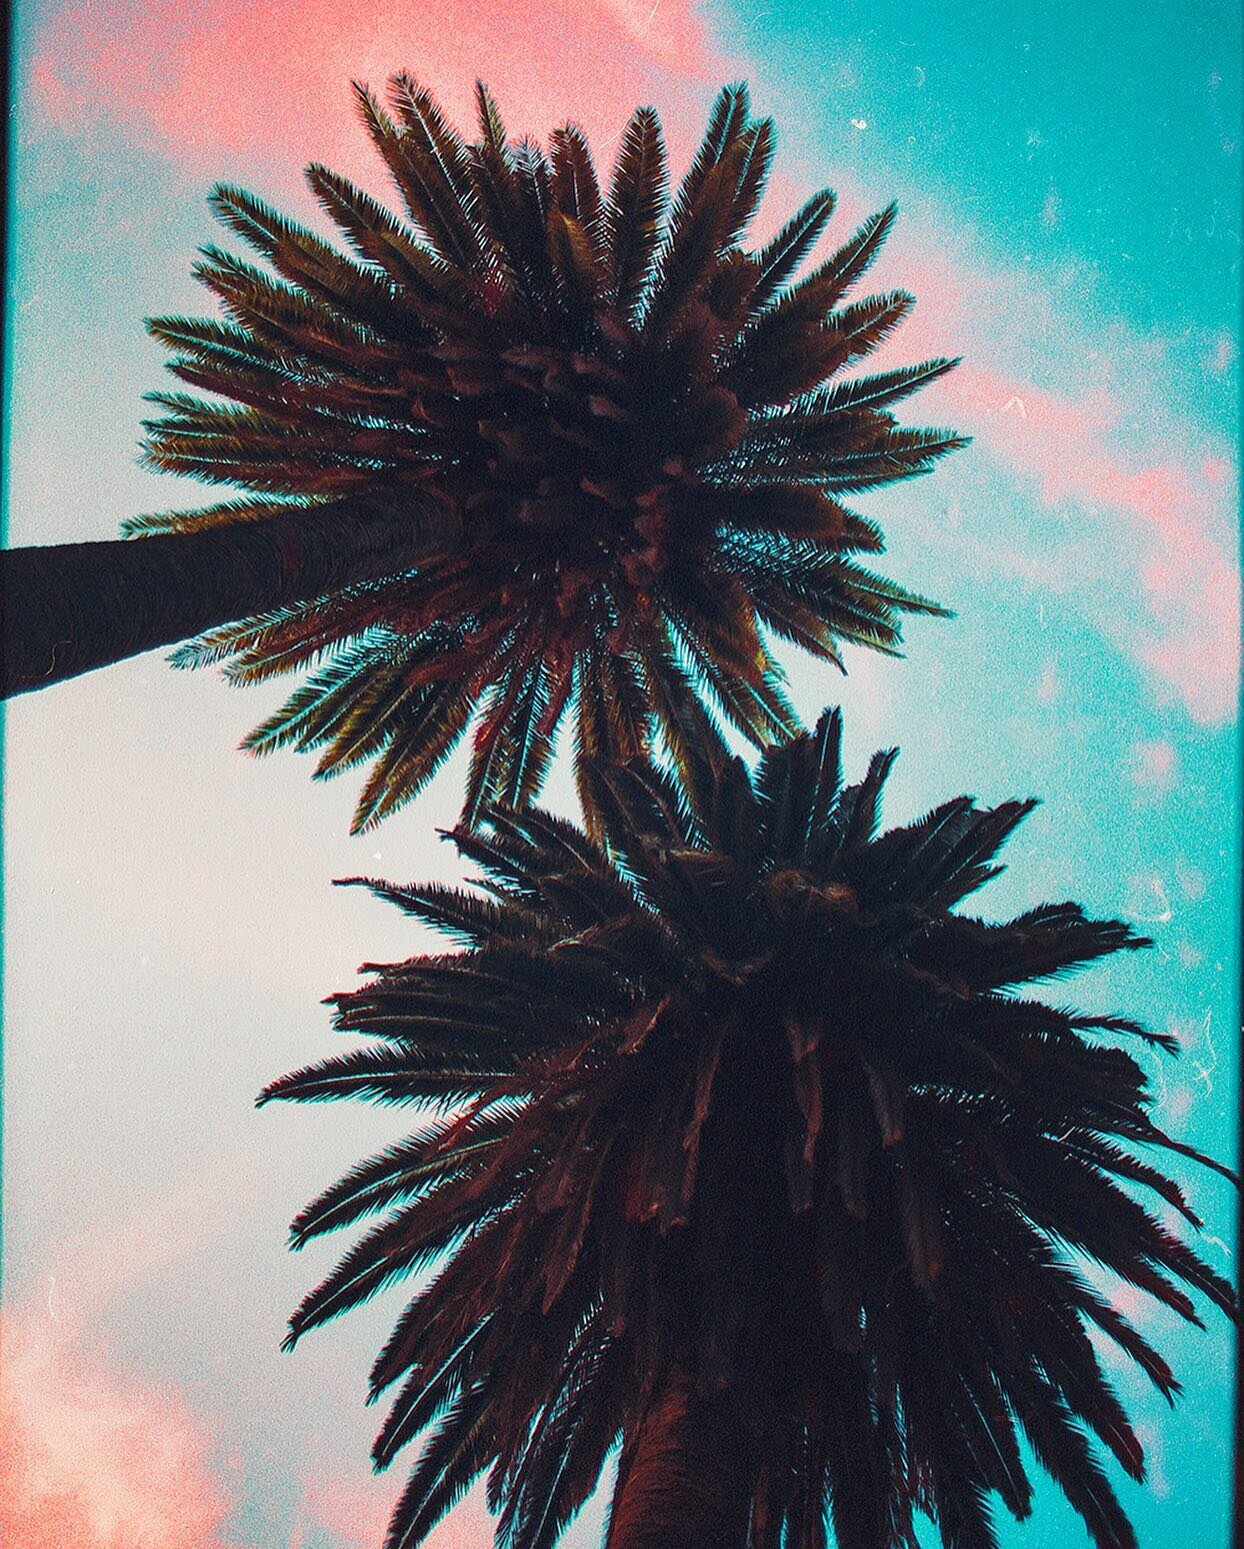 Palm trees are dumb or palm trees are cool I still can&rsquo;t decide
.

#cinestill800t #shootfilm #grainisgood #35analog #staybrokeshootfilm #photocinematica #thefilmgang #35mmbook #visualgrams #thinkveryfilm #35mm_look #supersweetstreet #nightwalke